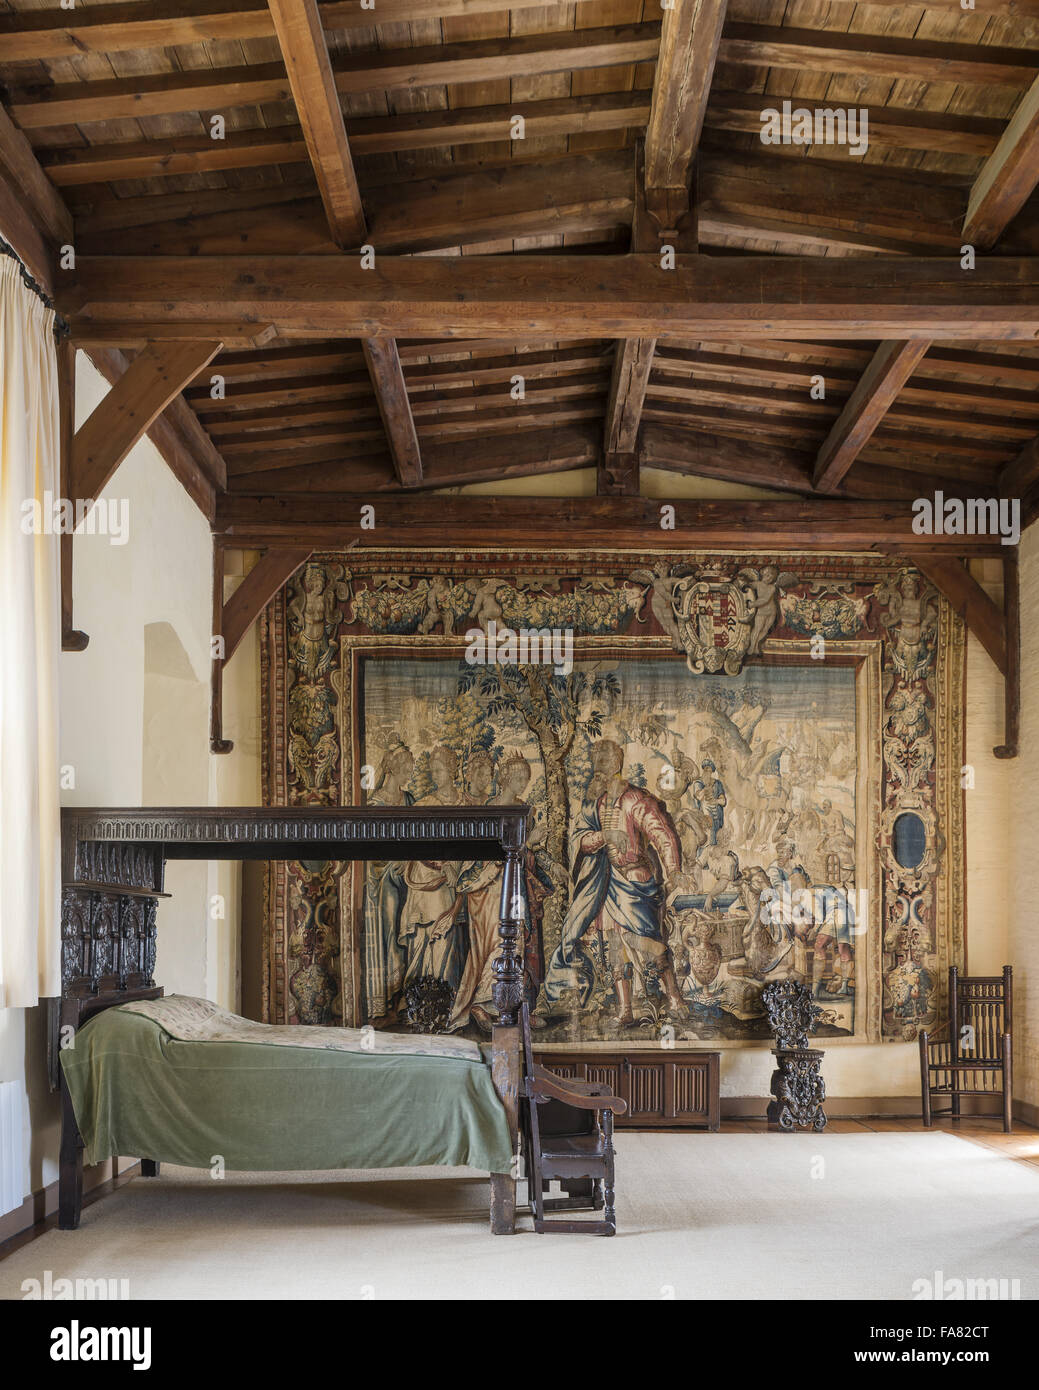 View of the Queen's Room, Oxburgh Hall, Norfolk. Occupying the second floor of the Gatehouse, this is where Henry VII's Queen, Elizabeth of York, stayed during her visit in 1487. Stock Photo